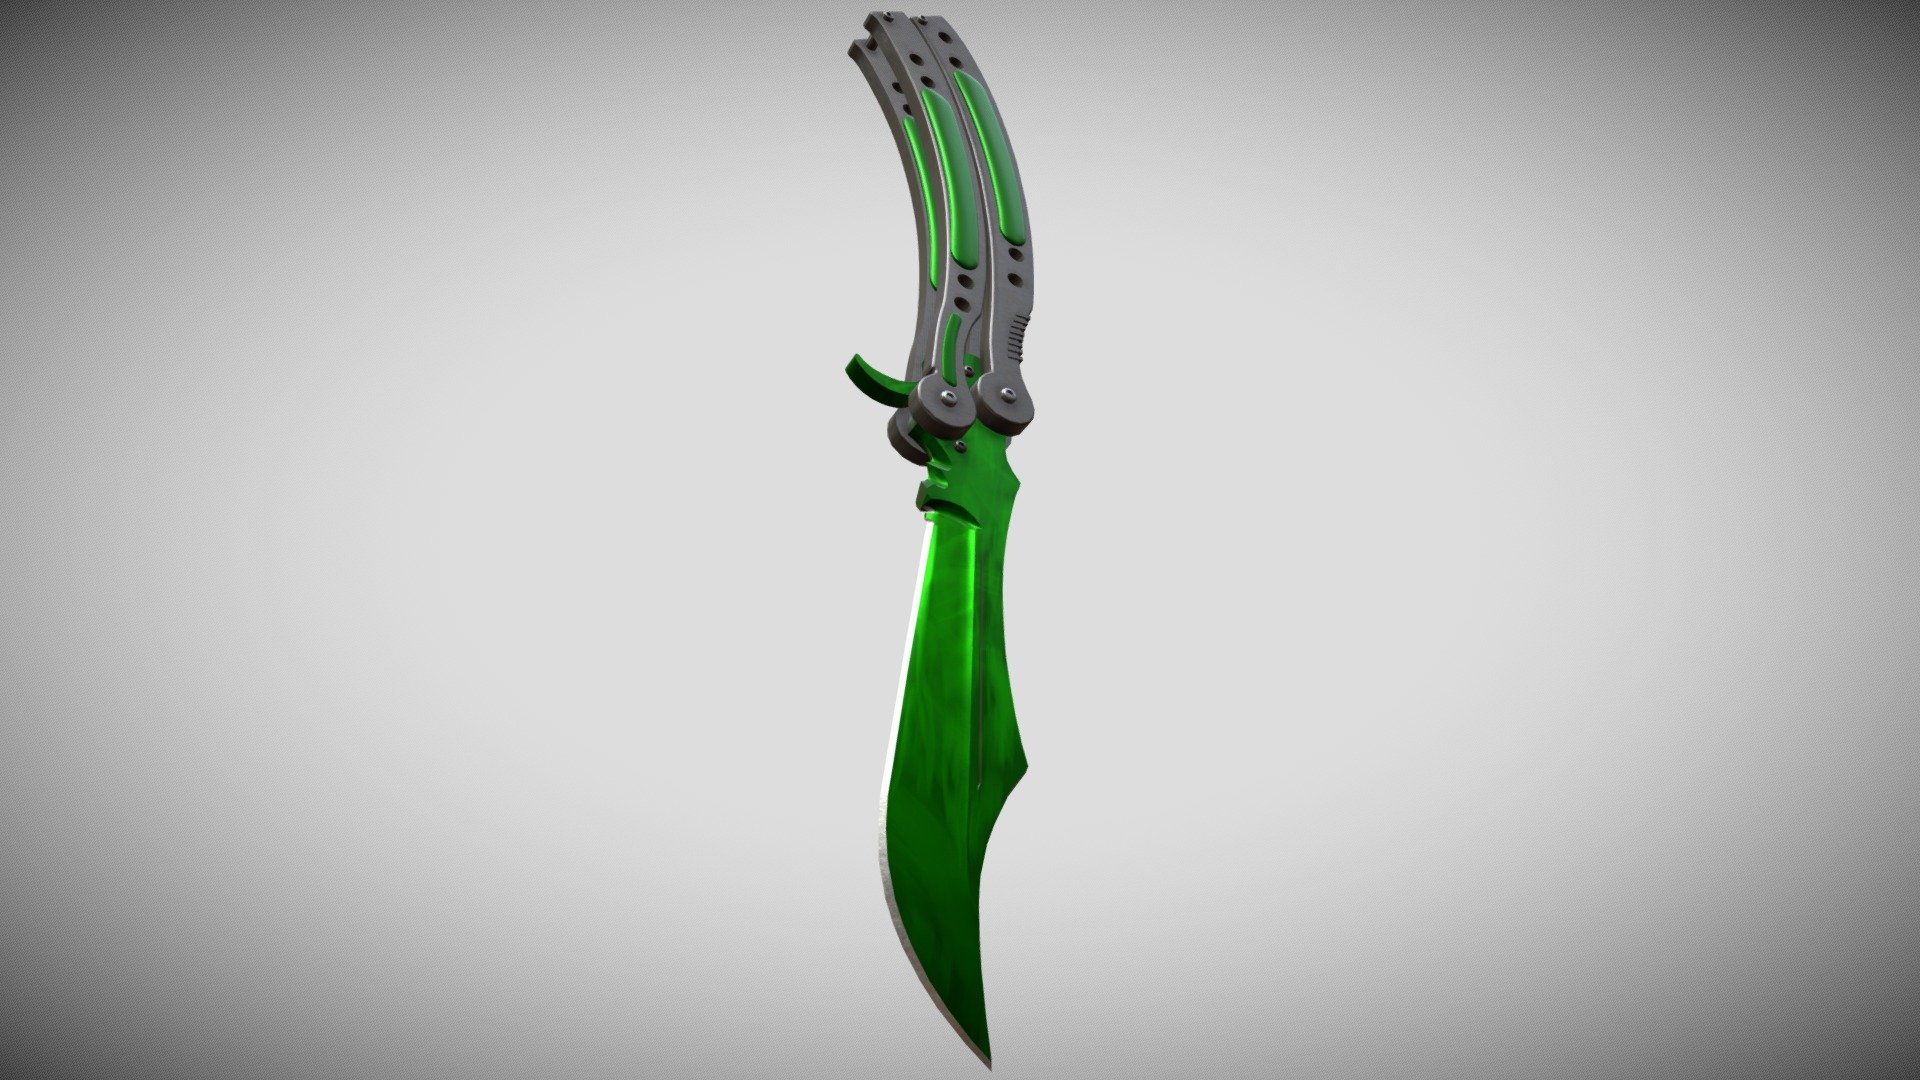 Butterfly Knife from CS:GO with emerald pattern Model made in Autodesk MAYA, textured and rendered in Substance Painter - Butterfly Knife Emerald - Buy Royalty Free 3D model by P7PO (@PiPo07) 3d model